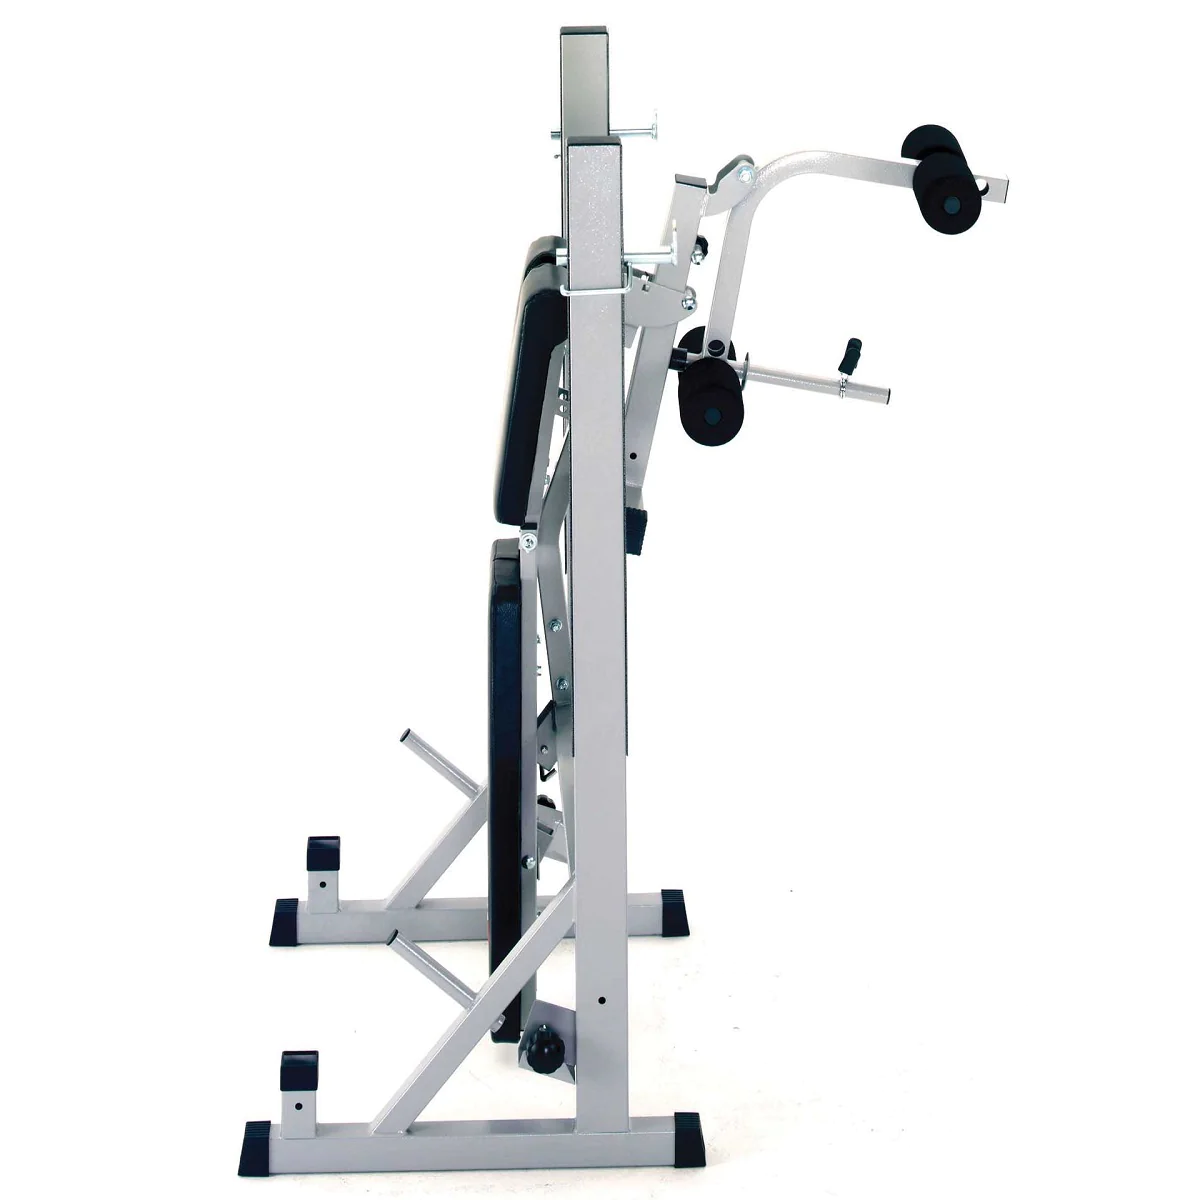 York Fitness 540 Heavy Duty Folding Barbell Bench Squat Rack - Folded View - Review UK